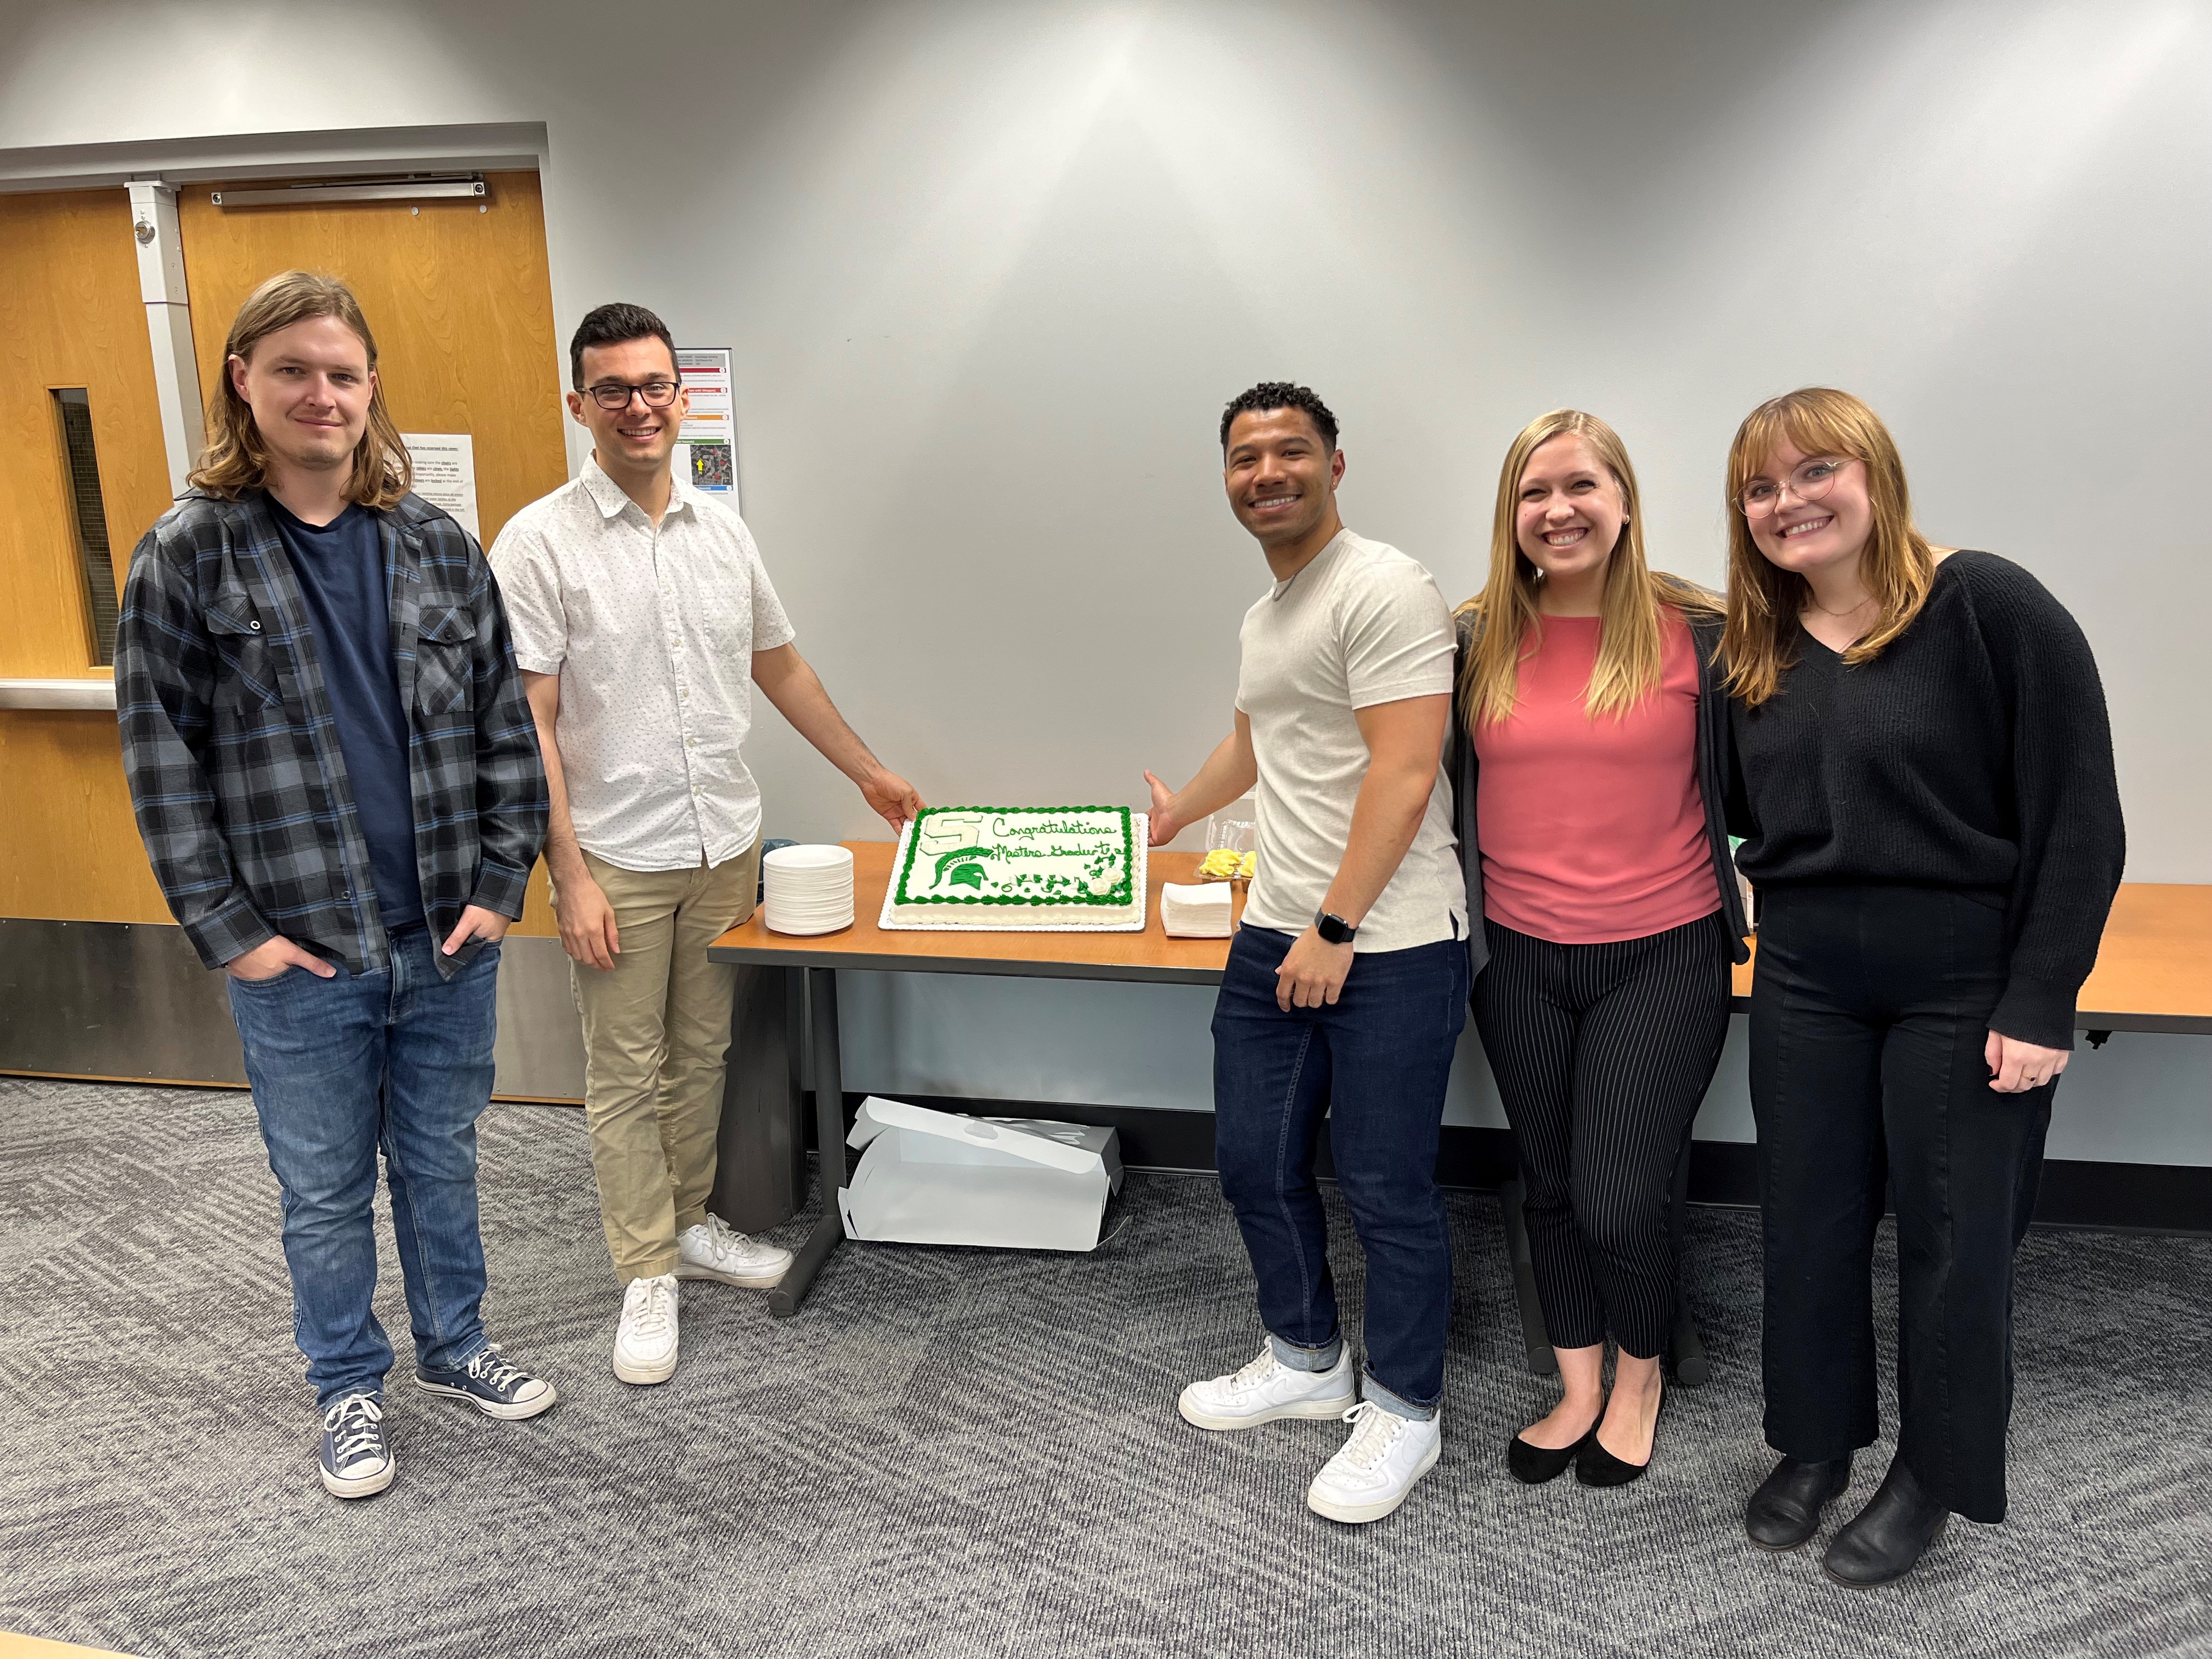 The Clinical Science master students smile with a congratulations cake!